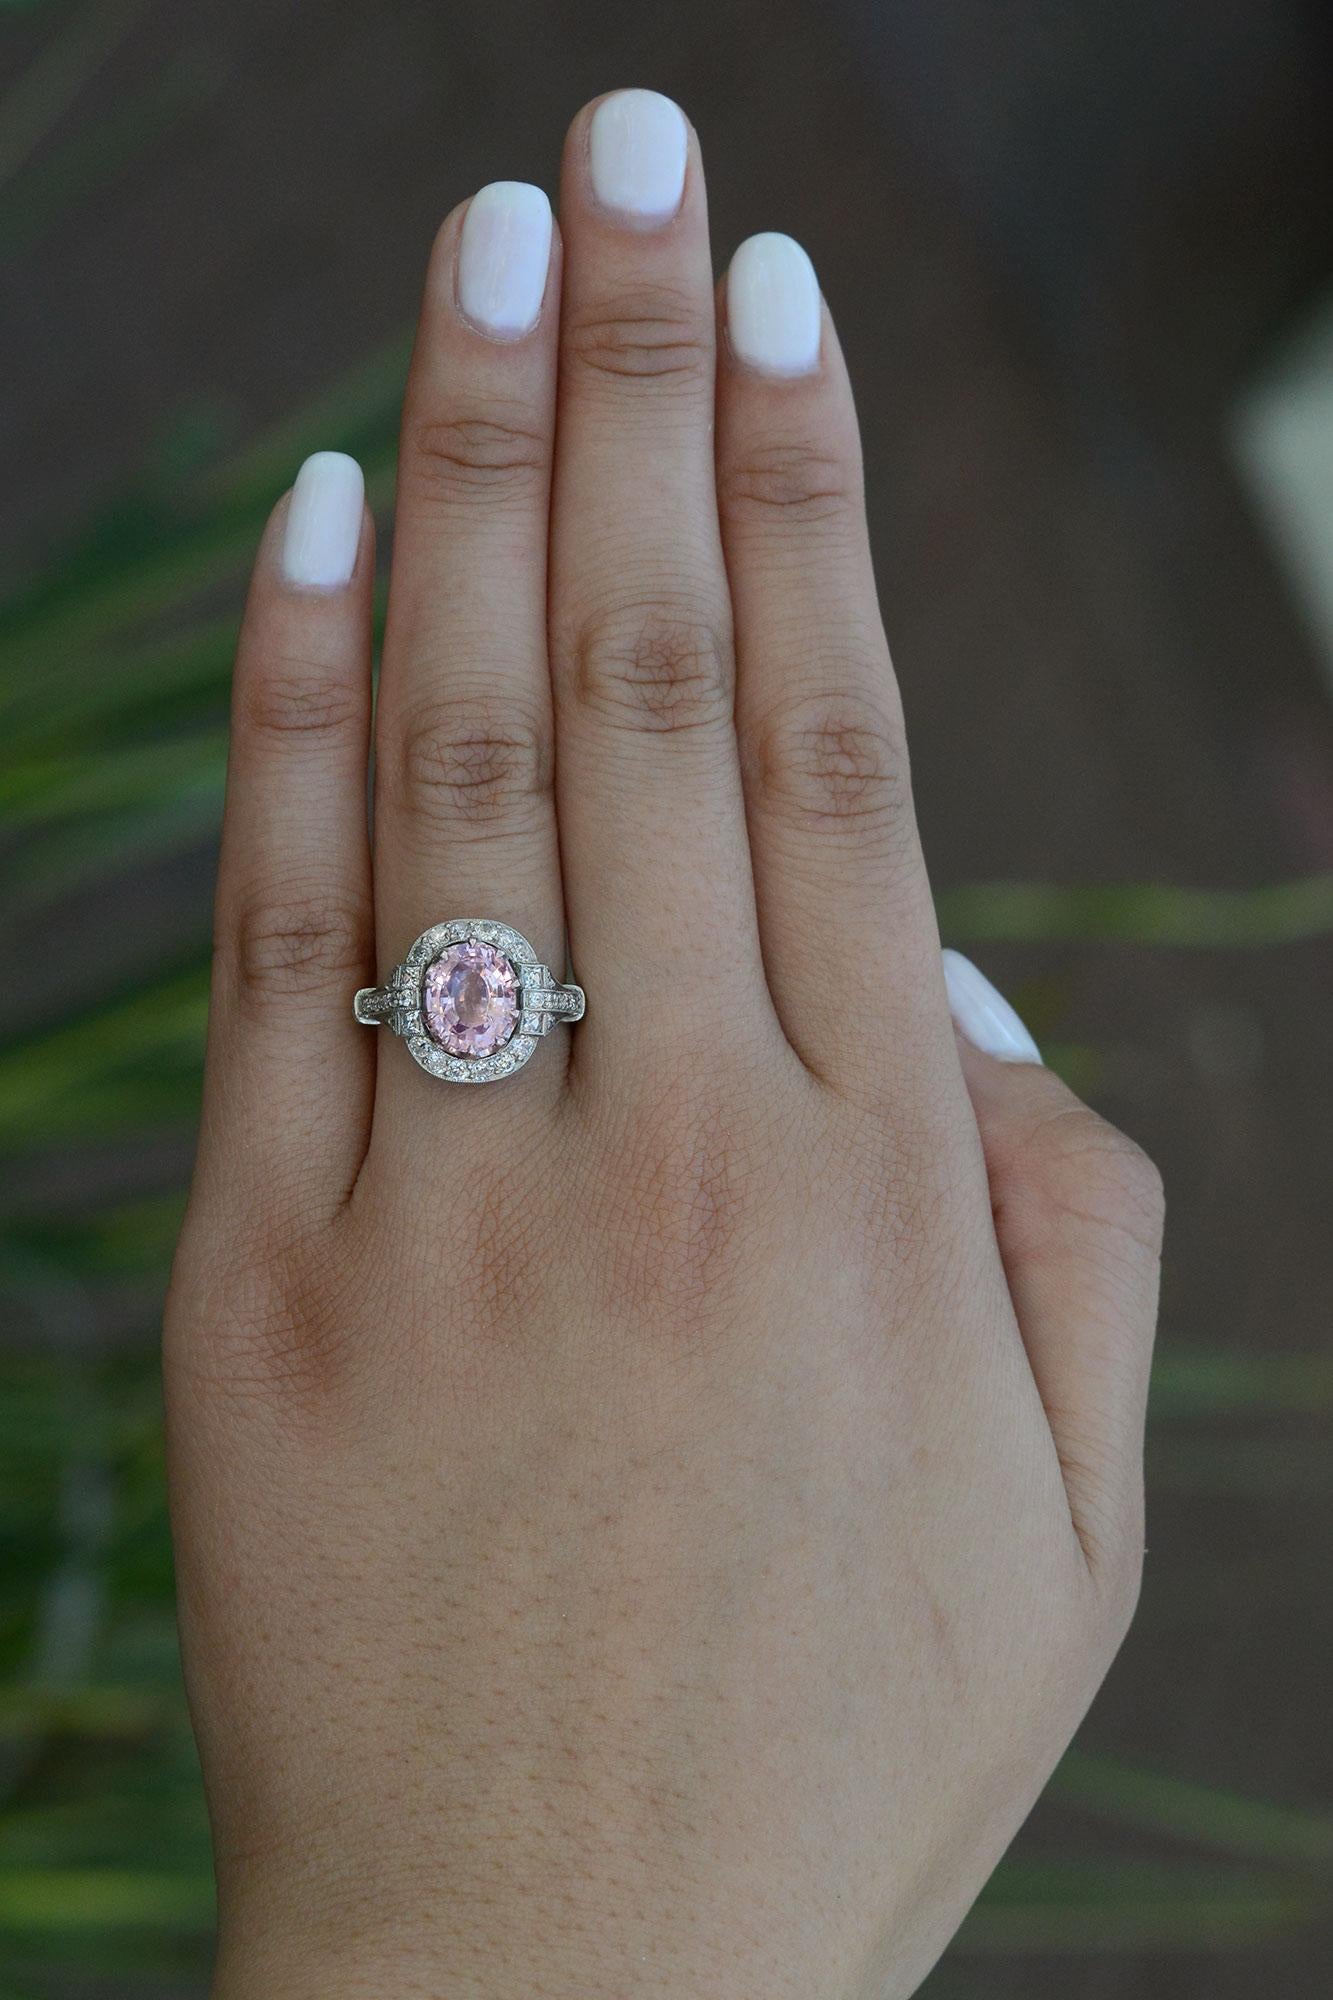 A bright, blush Padparadscha sapphire is the highlight of this gorgeous, detailed engagement ring.  Possessing a lustrous and valuable orangy pink color, this most prized of Ceylon sapphires named from the Sinhalese for lotus blossom.. A unique gem